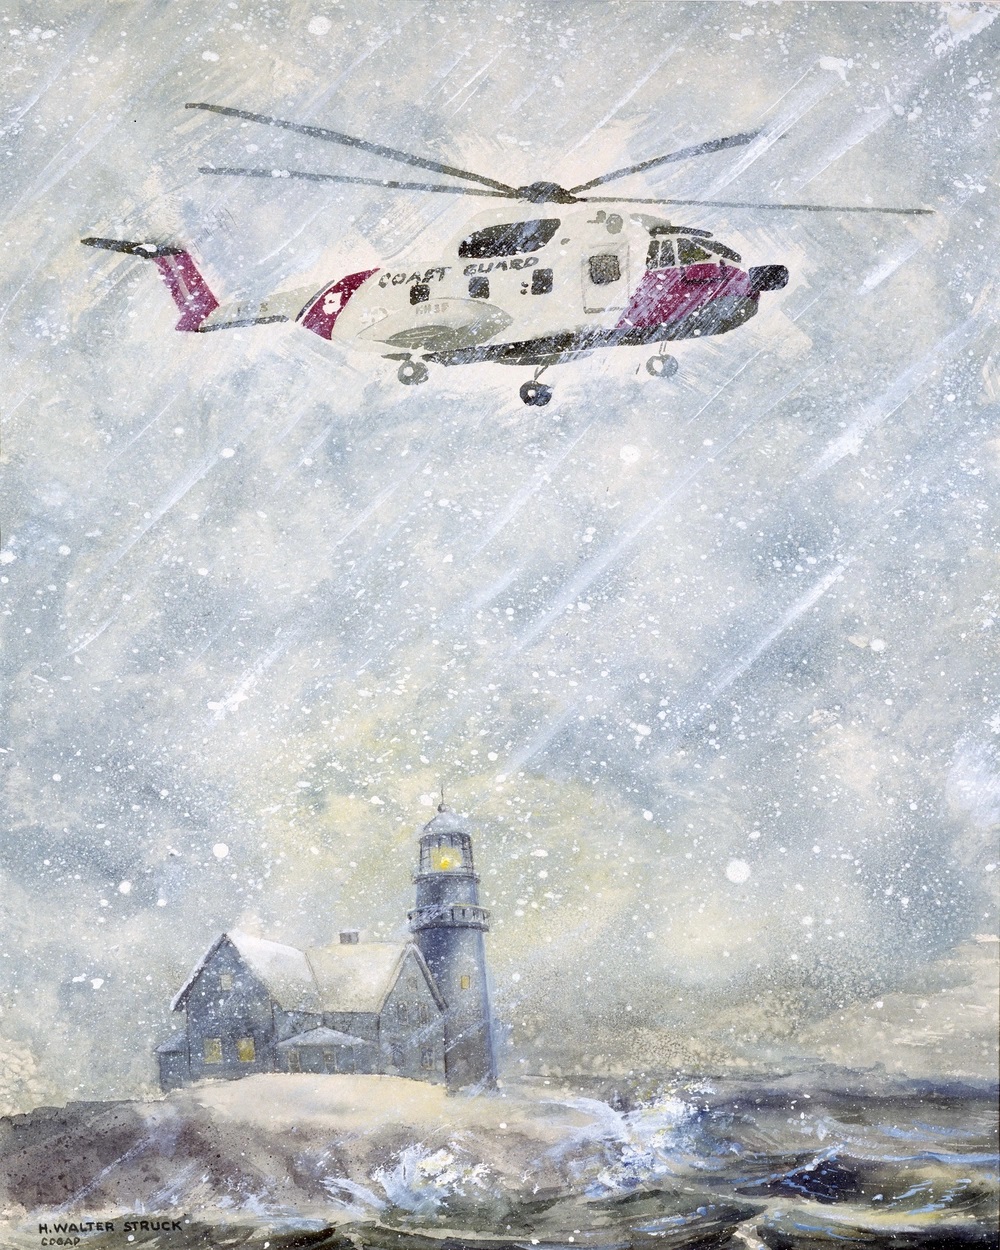 Defying a blinding snow storm, a Coast Guard HH-3 "Pelican" helicopter searches for distressed mariners off Elizabeth City, North Carolina. The beacon of a lighthouse fights to pierce the blanket of white. The HH-3 was the last of the Coast Guard amphibious helicopters. The medium range, twin engine amphibian carried a sophisticated rotary wing avionics package, cruised at 120 knots, and was capable of reaching 142 knots. It had a normal crew of pilot, co-pilot, navigator, flight mechanic, and could carry up to twenty passengers.